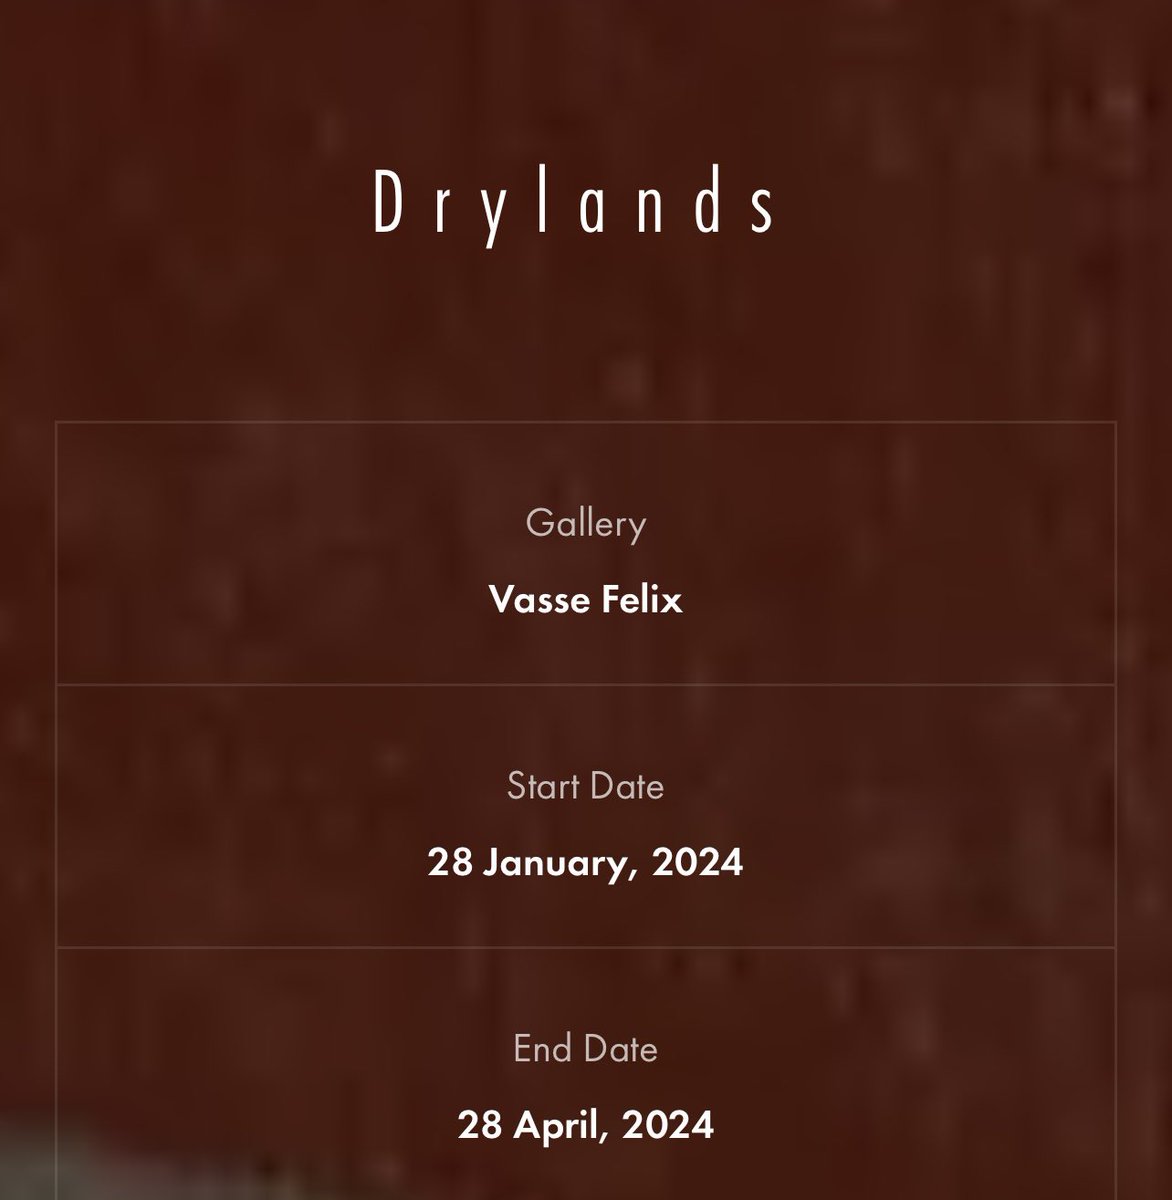 What an amazing week it has been and a great start to 2024! Honoured to have been invited as part of the group exhibition ‘Drylands’ Holmes a Court Gallery Vasse Felix. ‘Drylands’ considers changes to the Western Australian landscape. Exhibition dates: 28 Jan - 28 April 2024